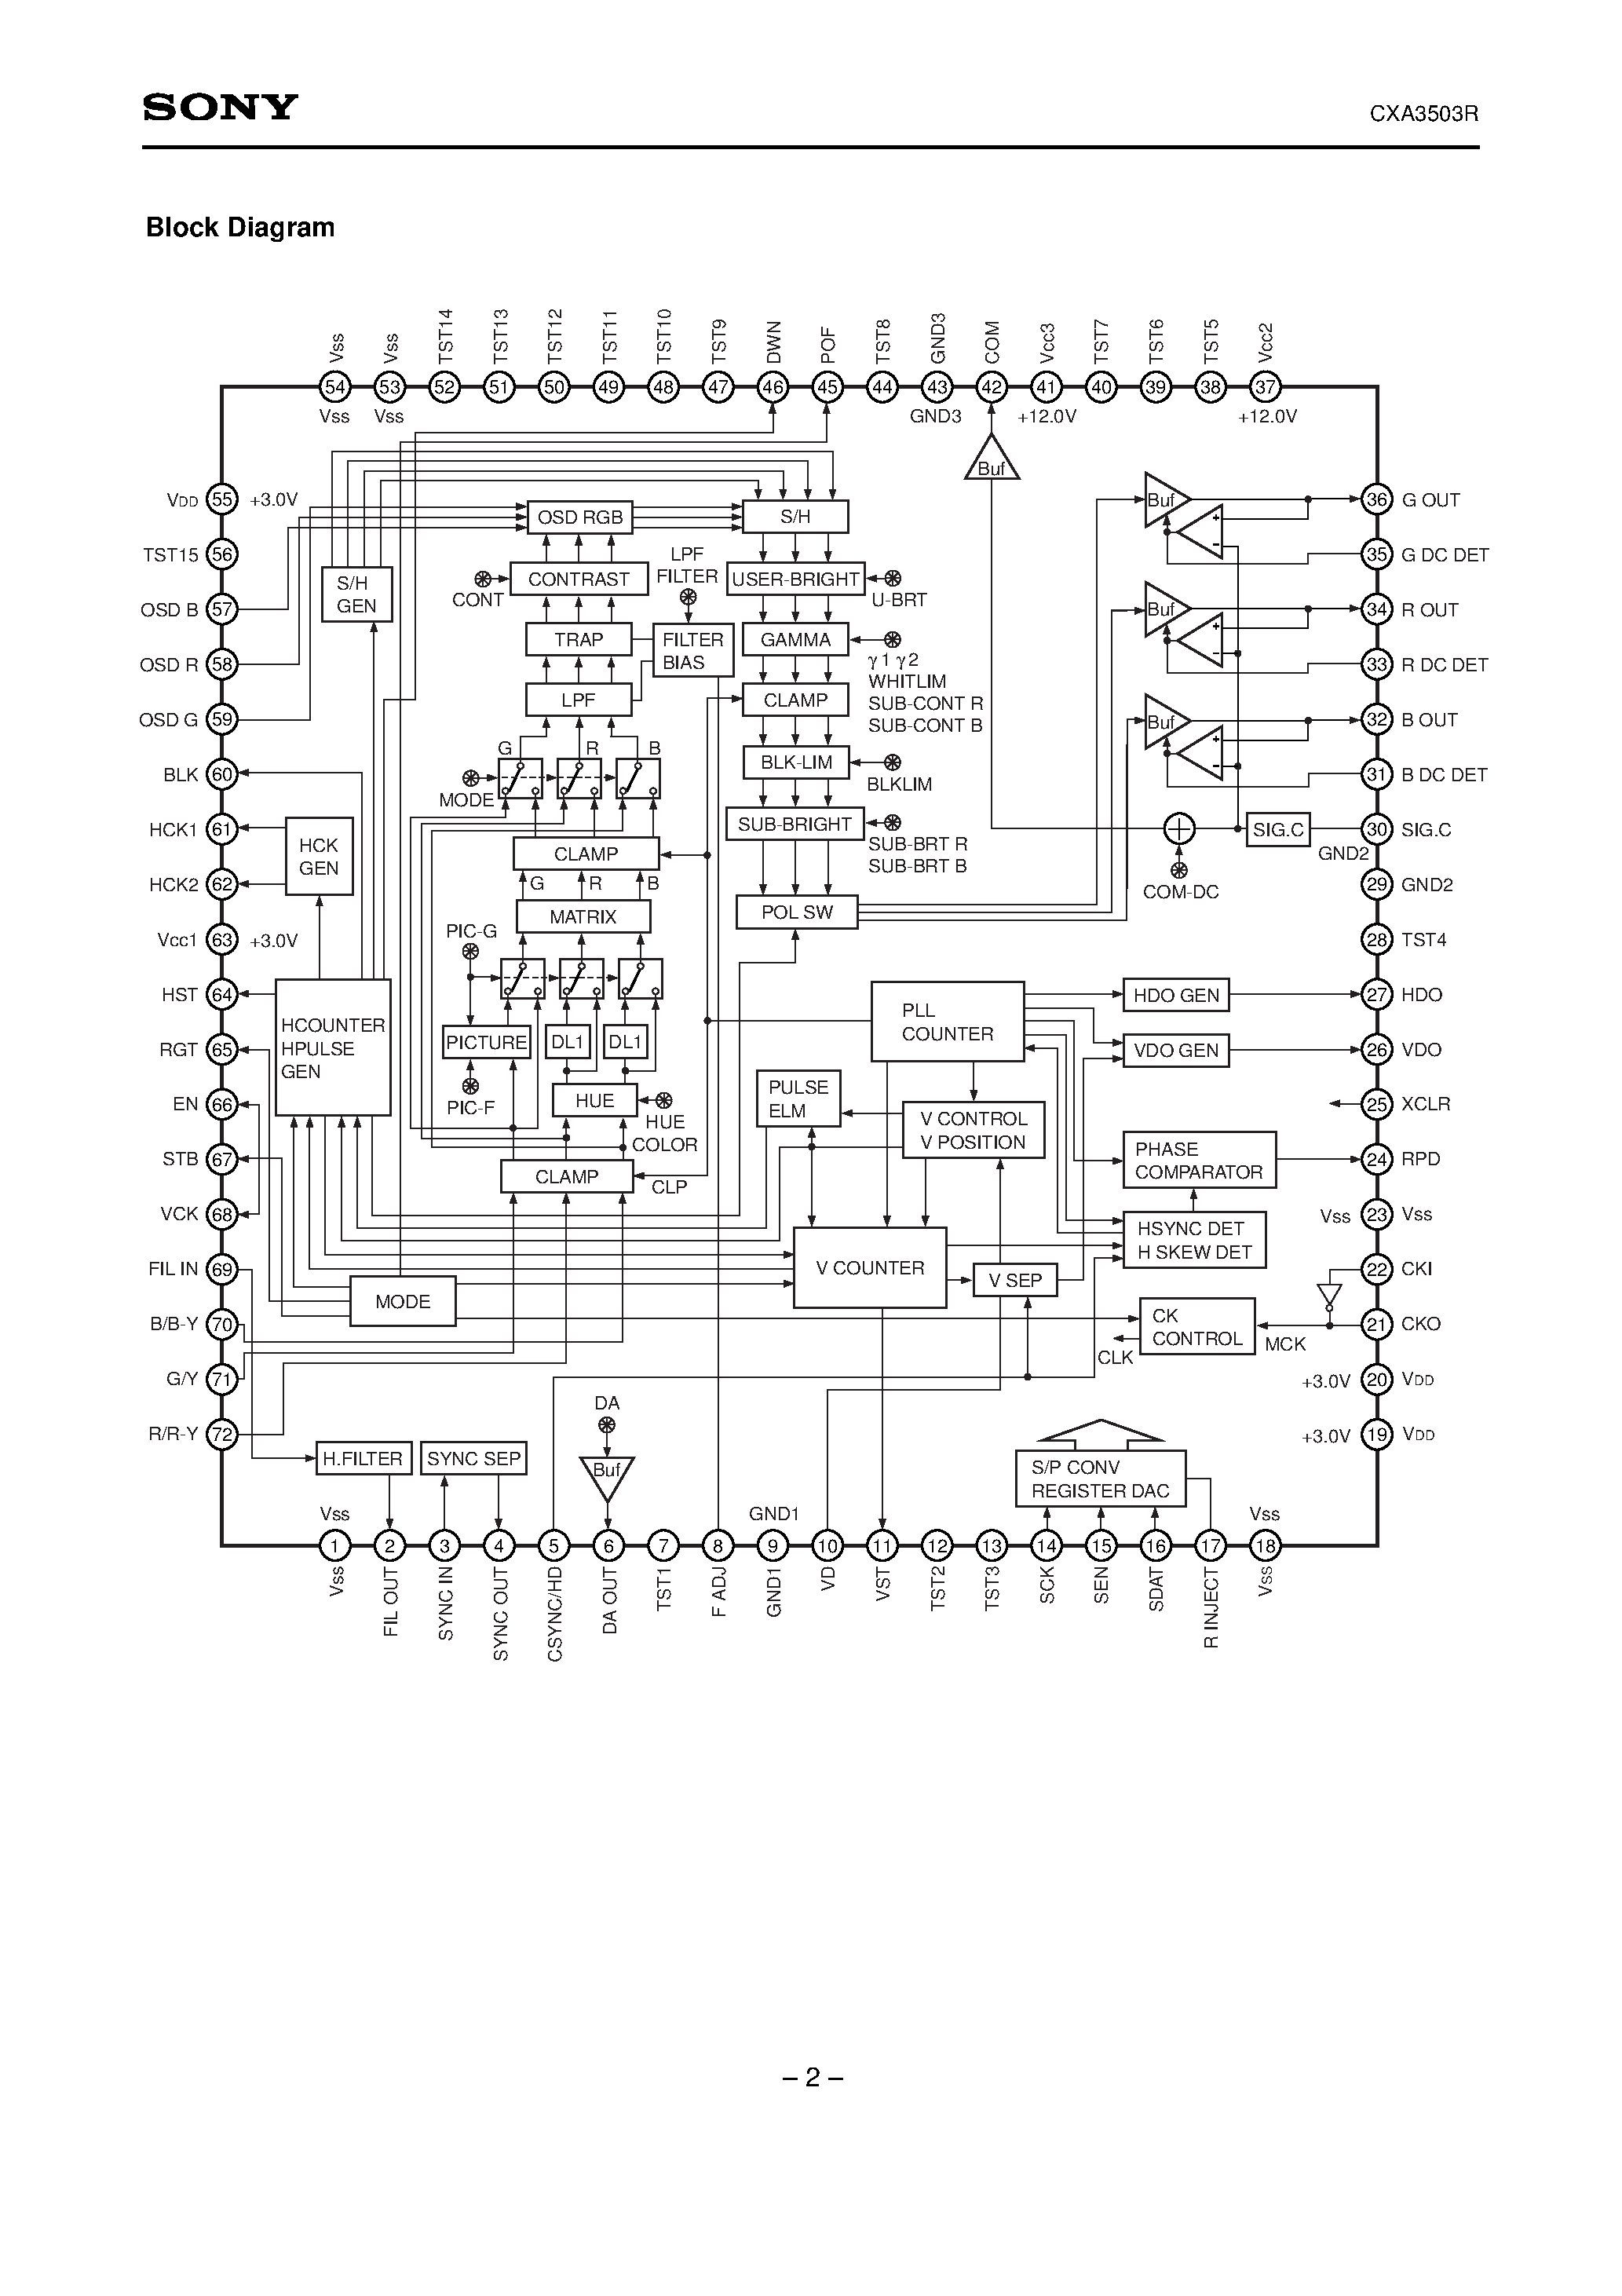 Datasheet CXA3503R - Driver/Timing Generator for Color LCD Panels page 2